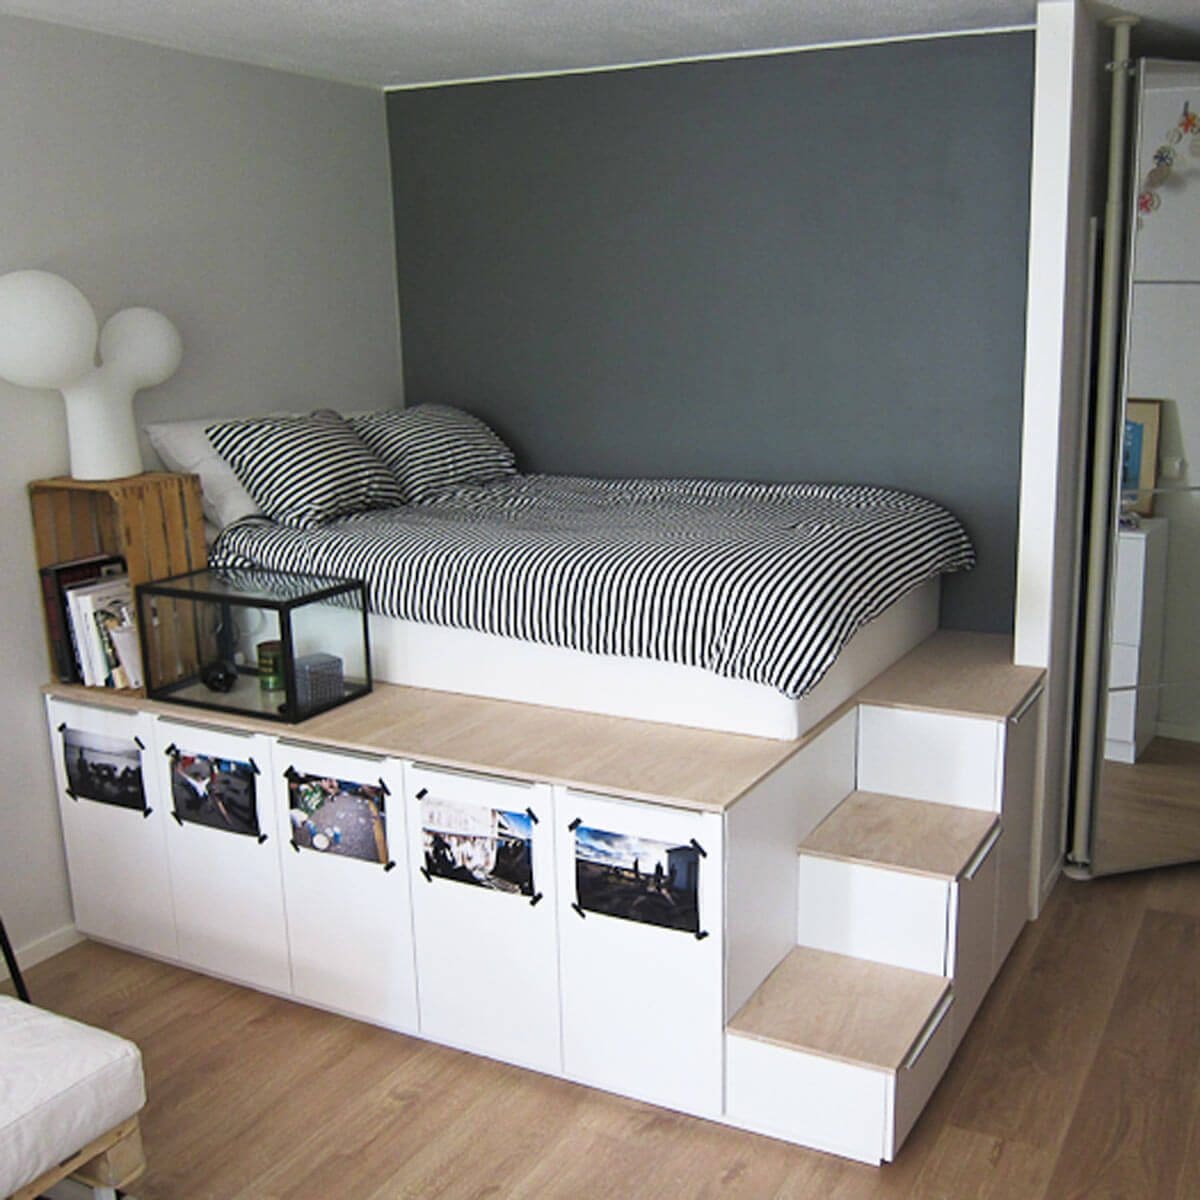 23 creative storage bed ideas to add to your bag - 187